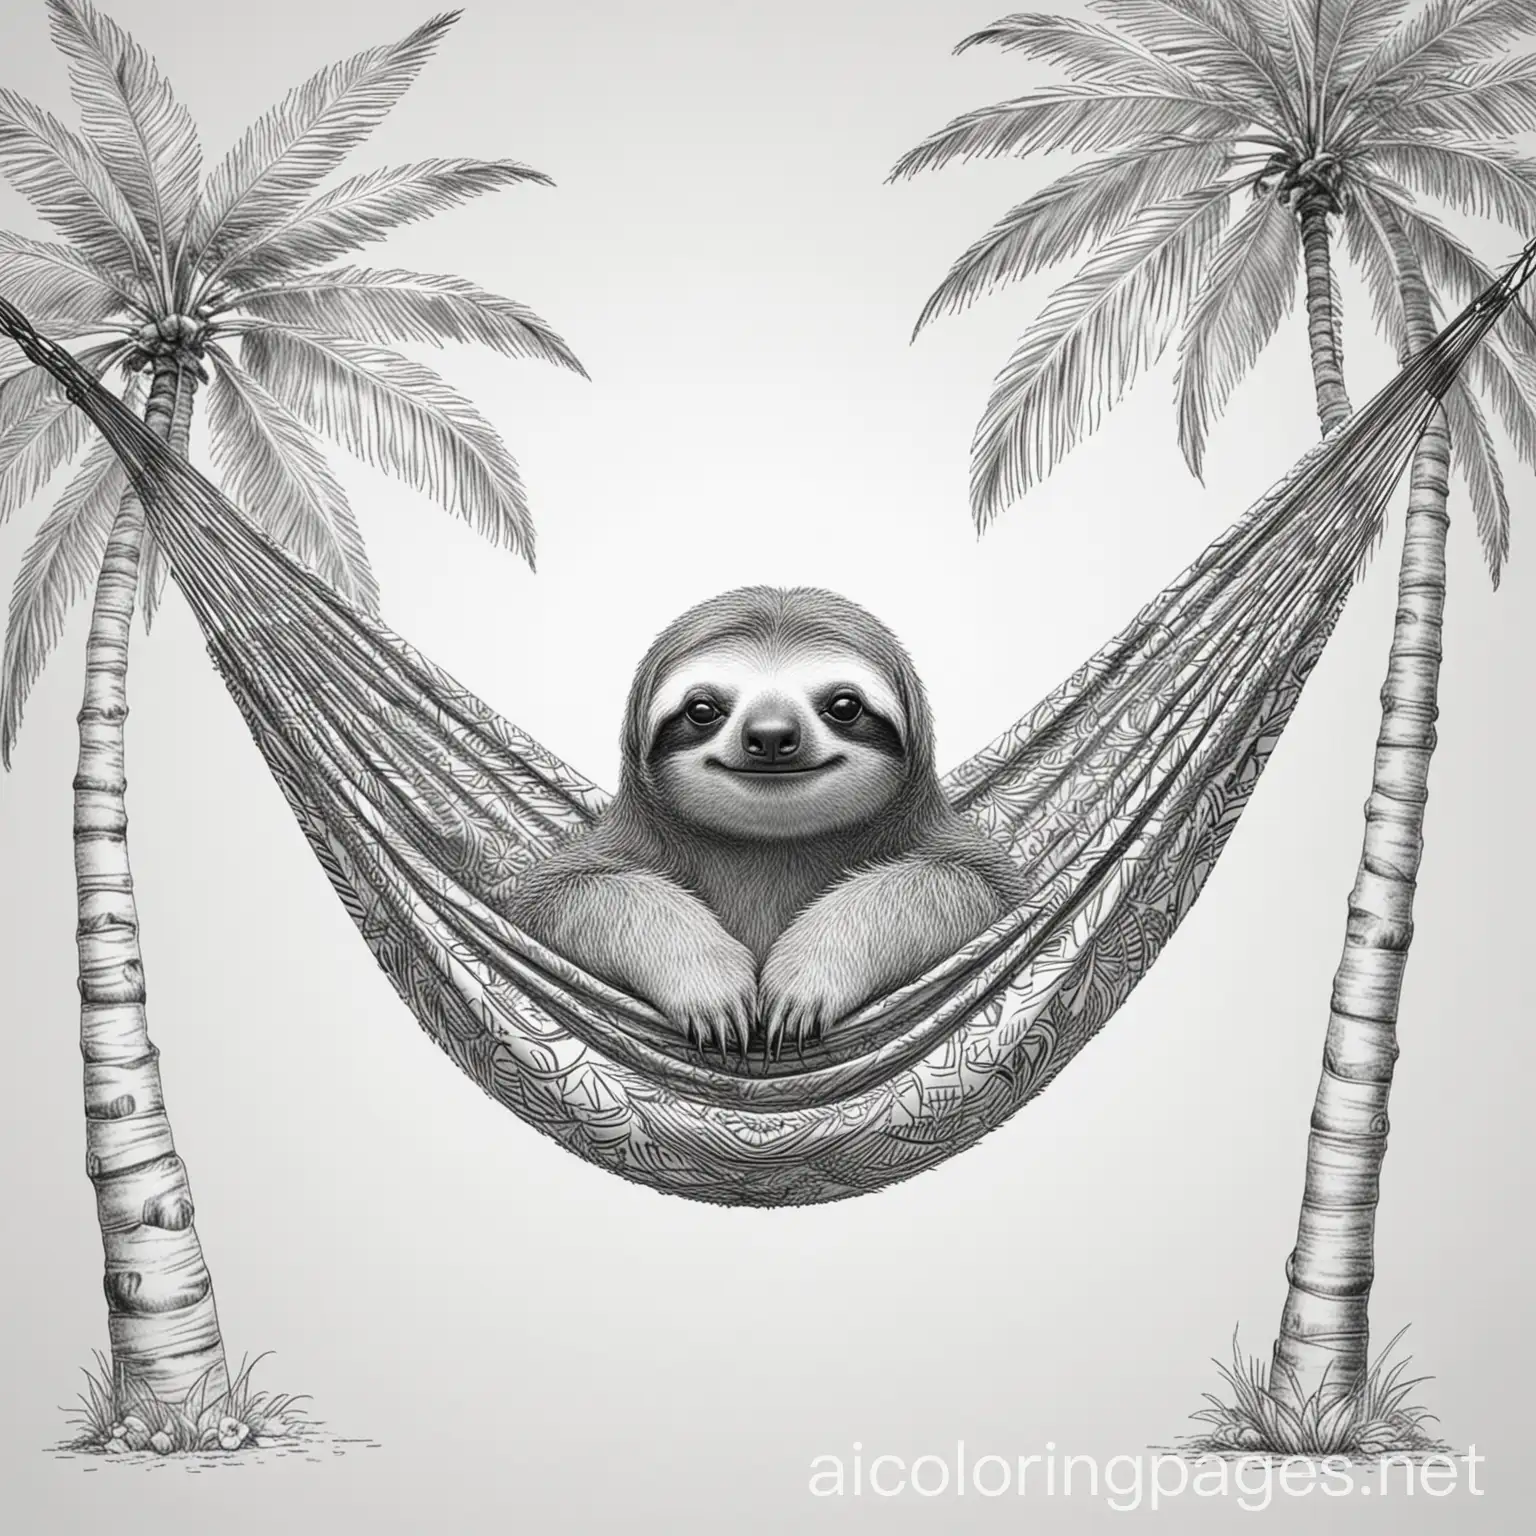 summer sloth laying on a hammock between 2 palm trees with a simple background, Coloring Page, black and white, line art, white background, Simplicity, Ample White Space. The background of the coloring page is plain white to make it easy for young children to color within the lines. The outlines of all the subjects are easy to distinguish, making it simple for kids to color without too much difficulty